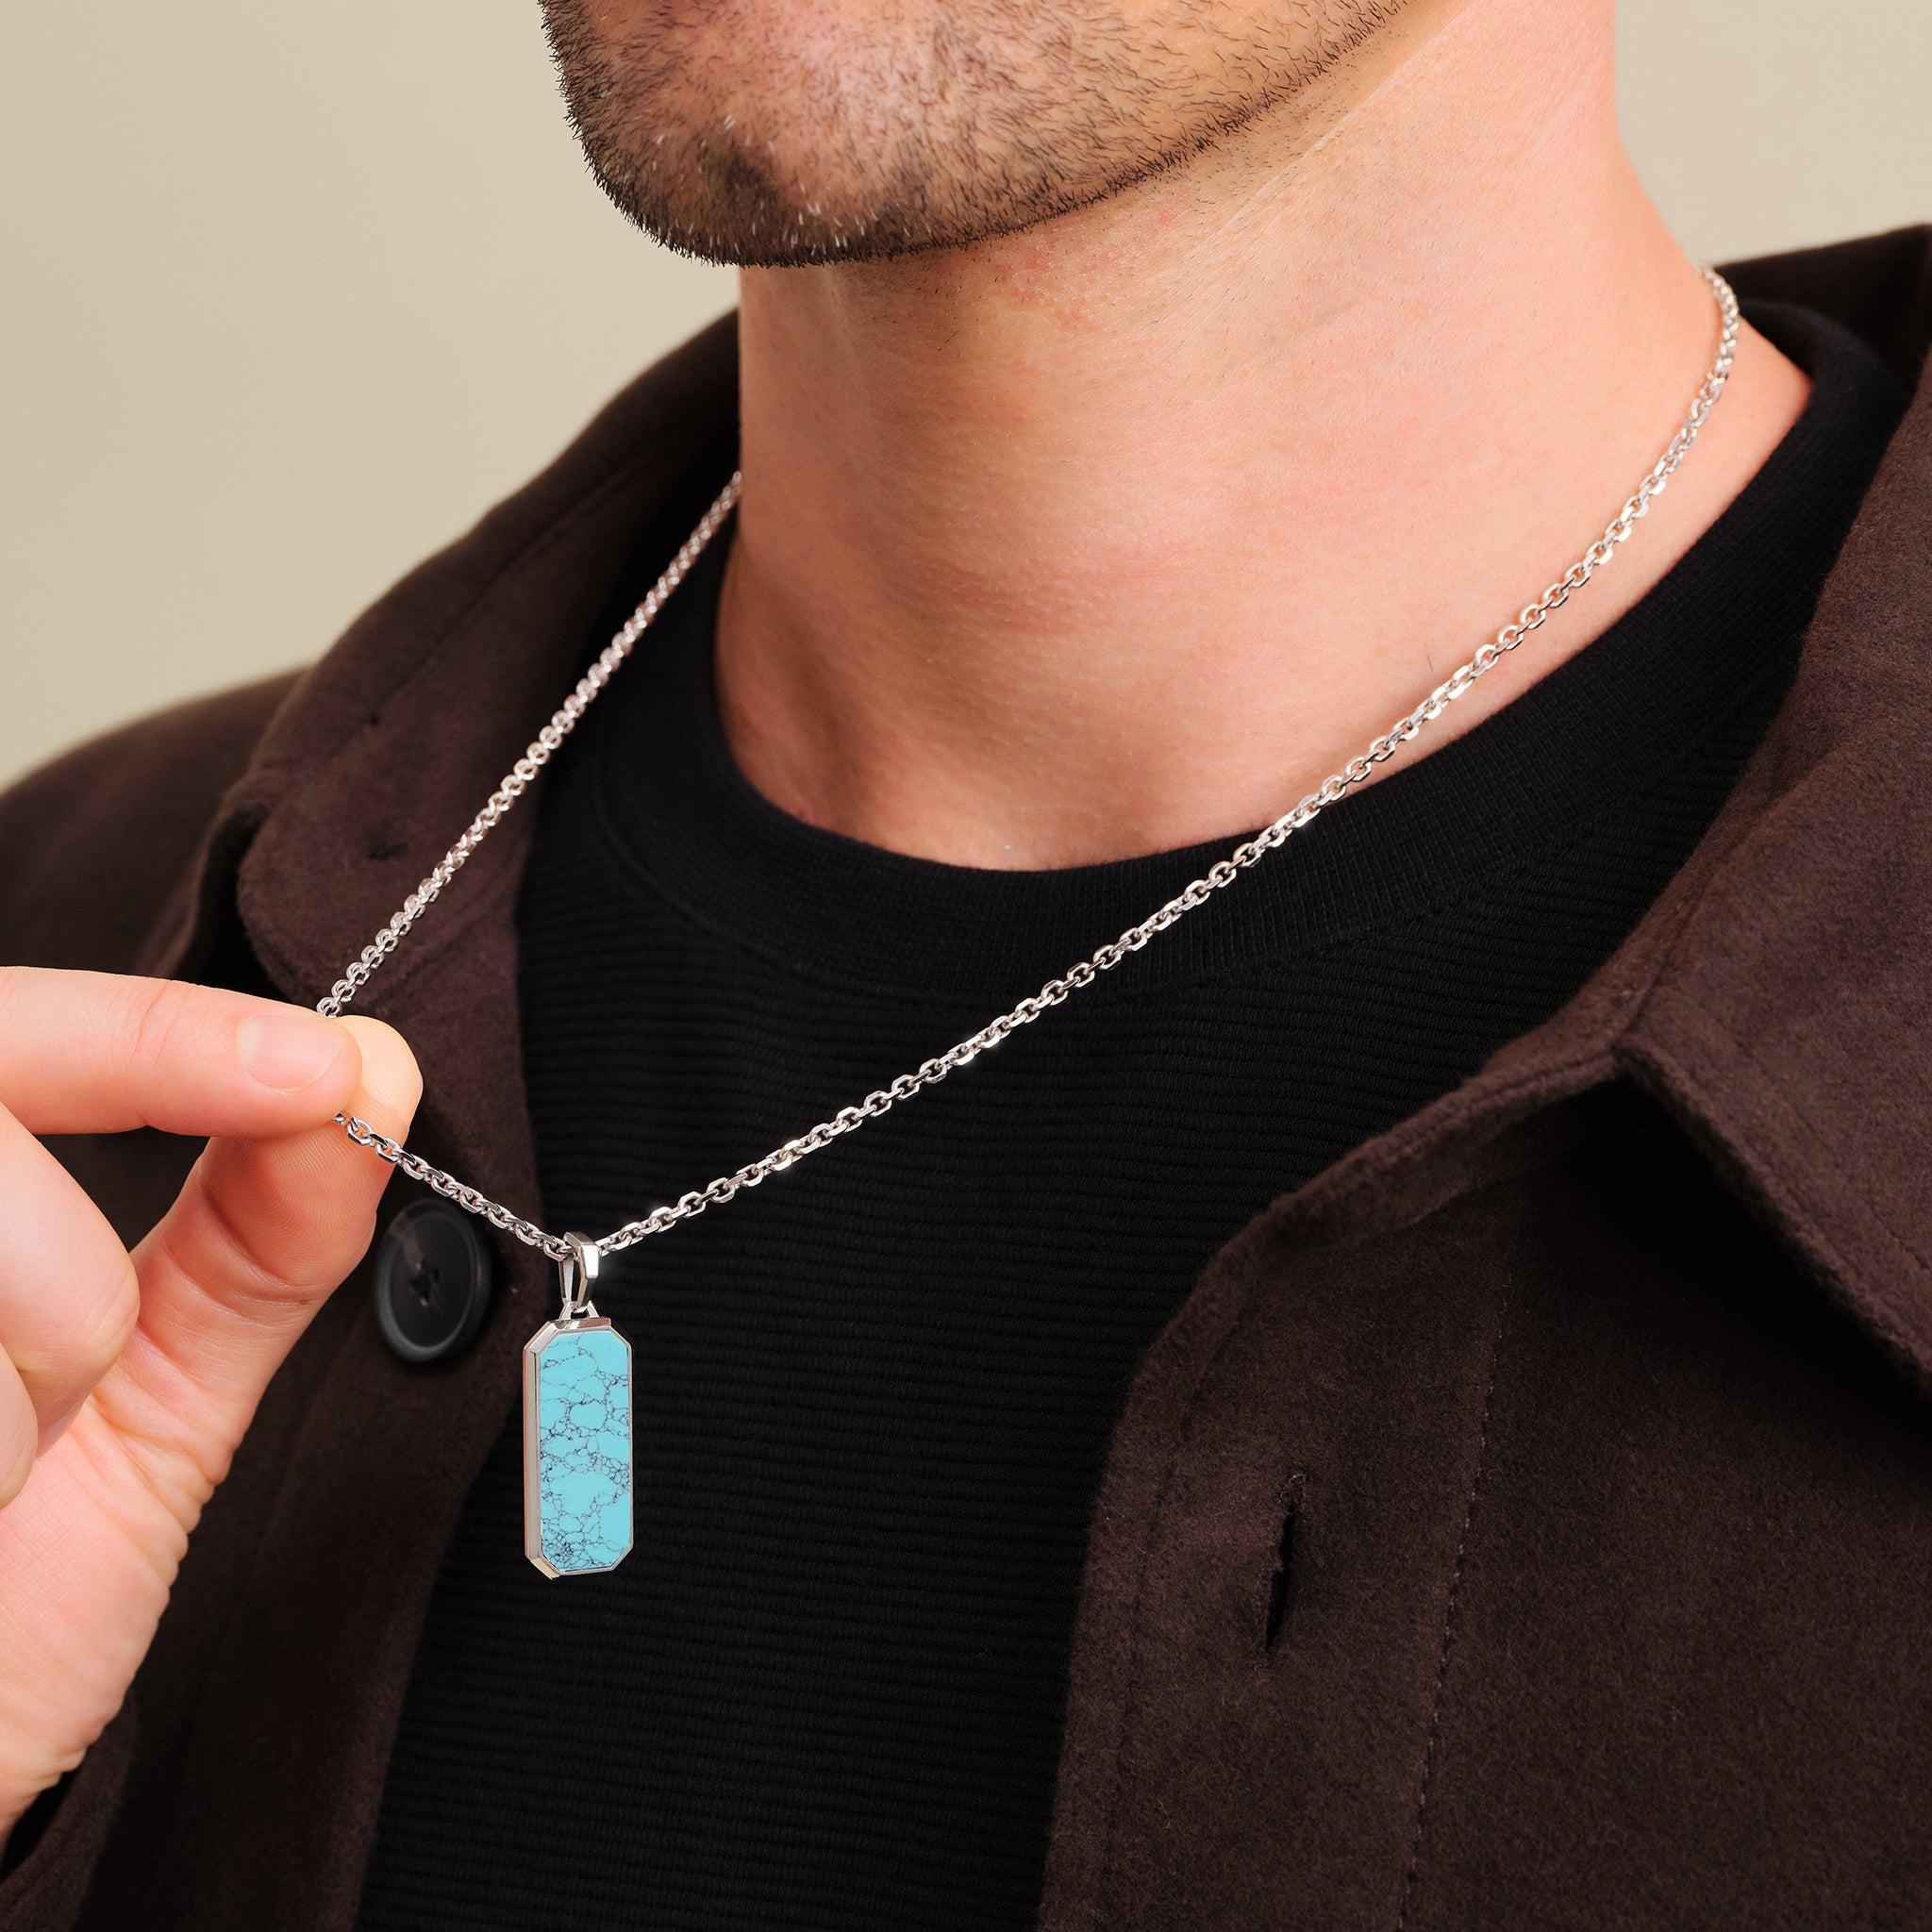 Turquoise Pendant Necklace Men Oxidized Silver Teardrop in Brutalist Rustic  Style Birthday Gift SN00041 - Etsy